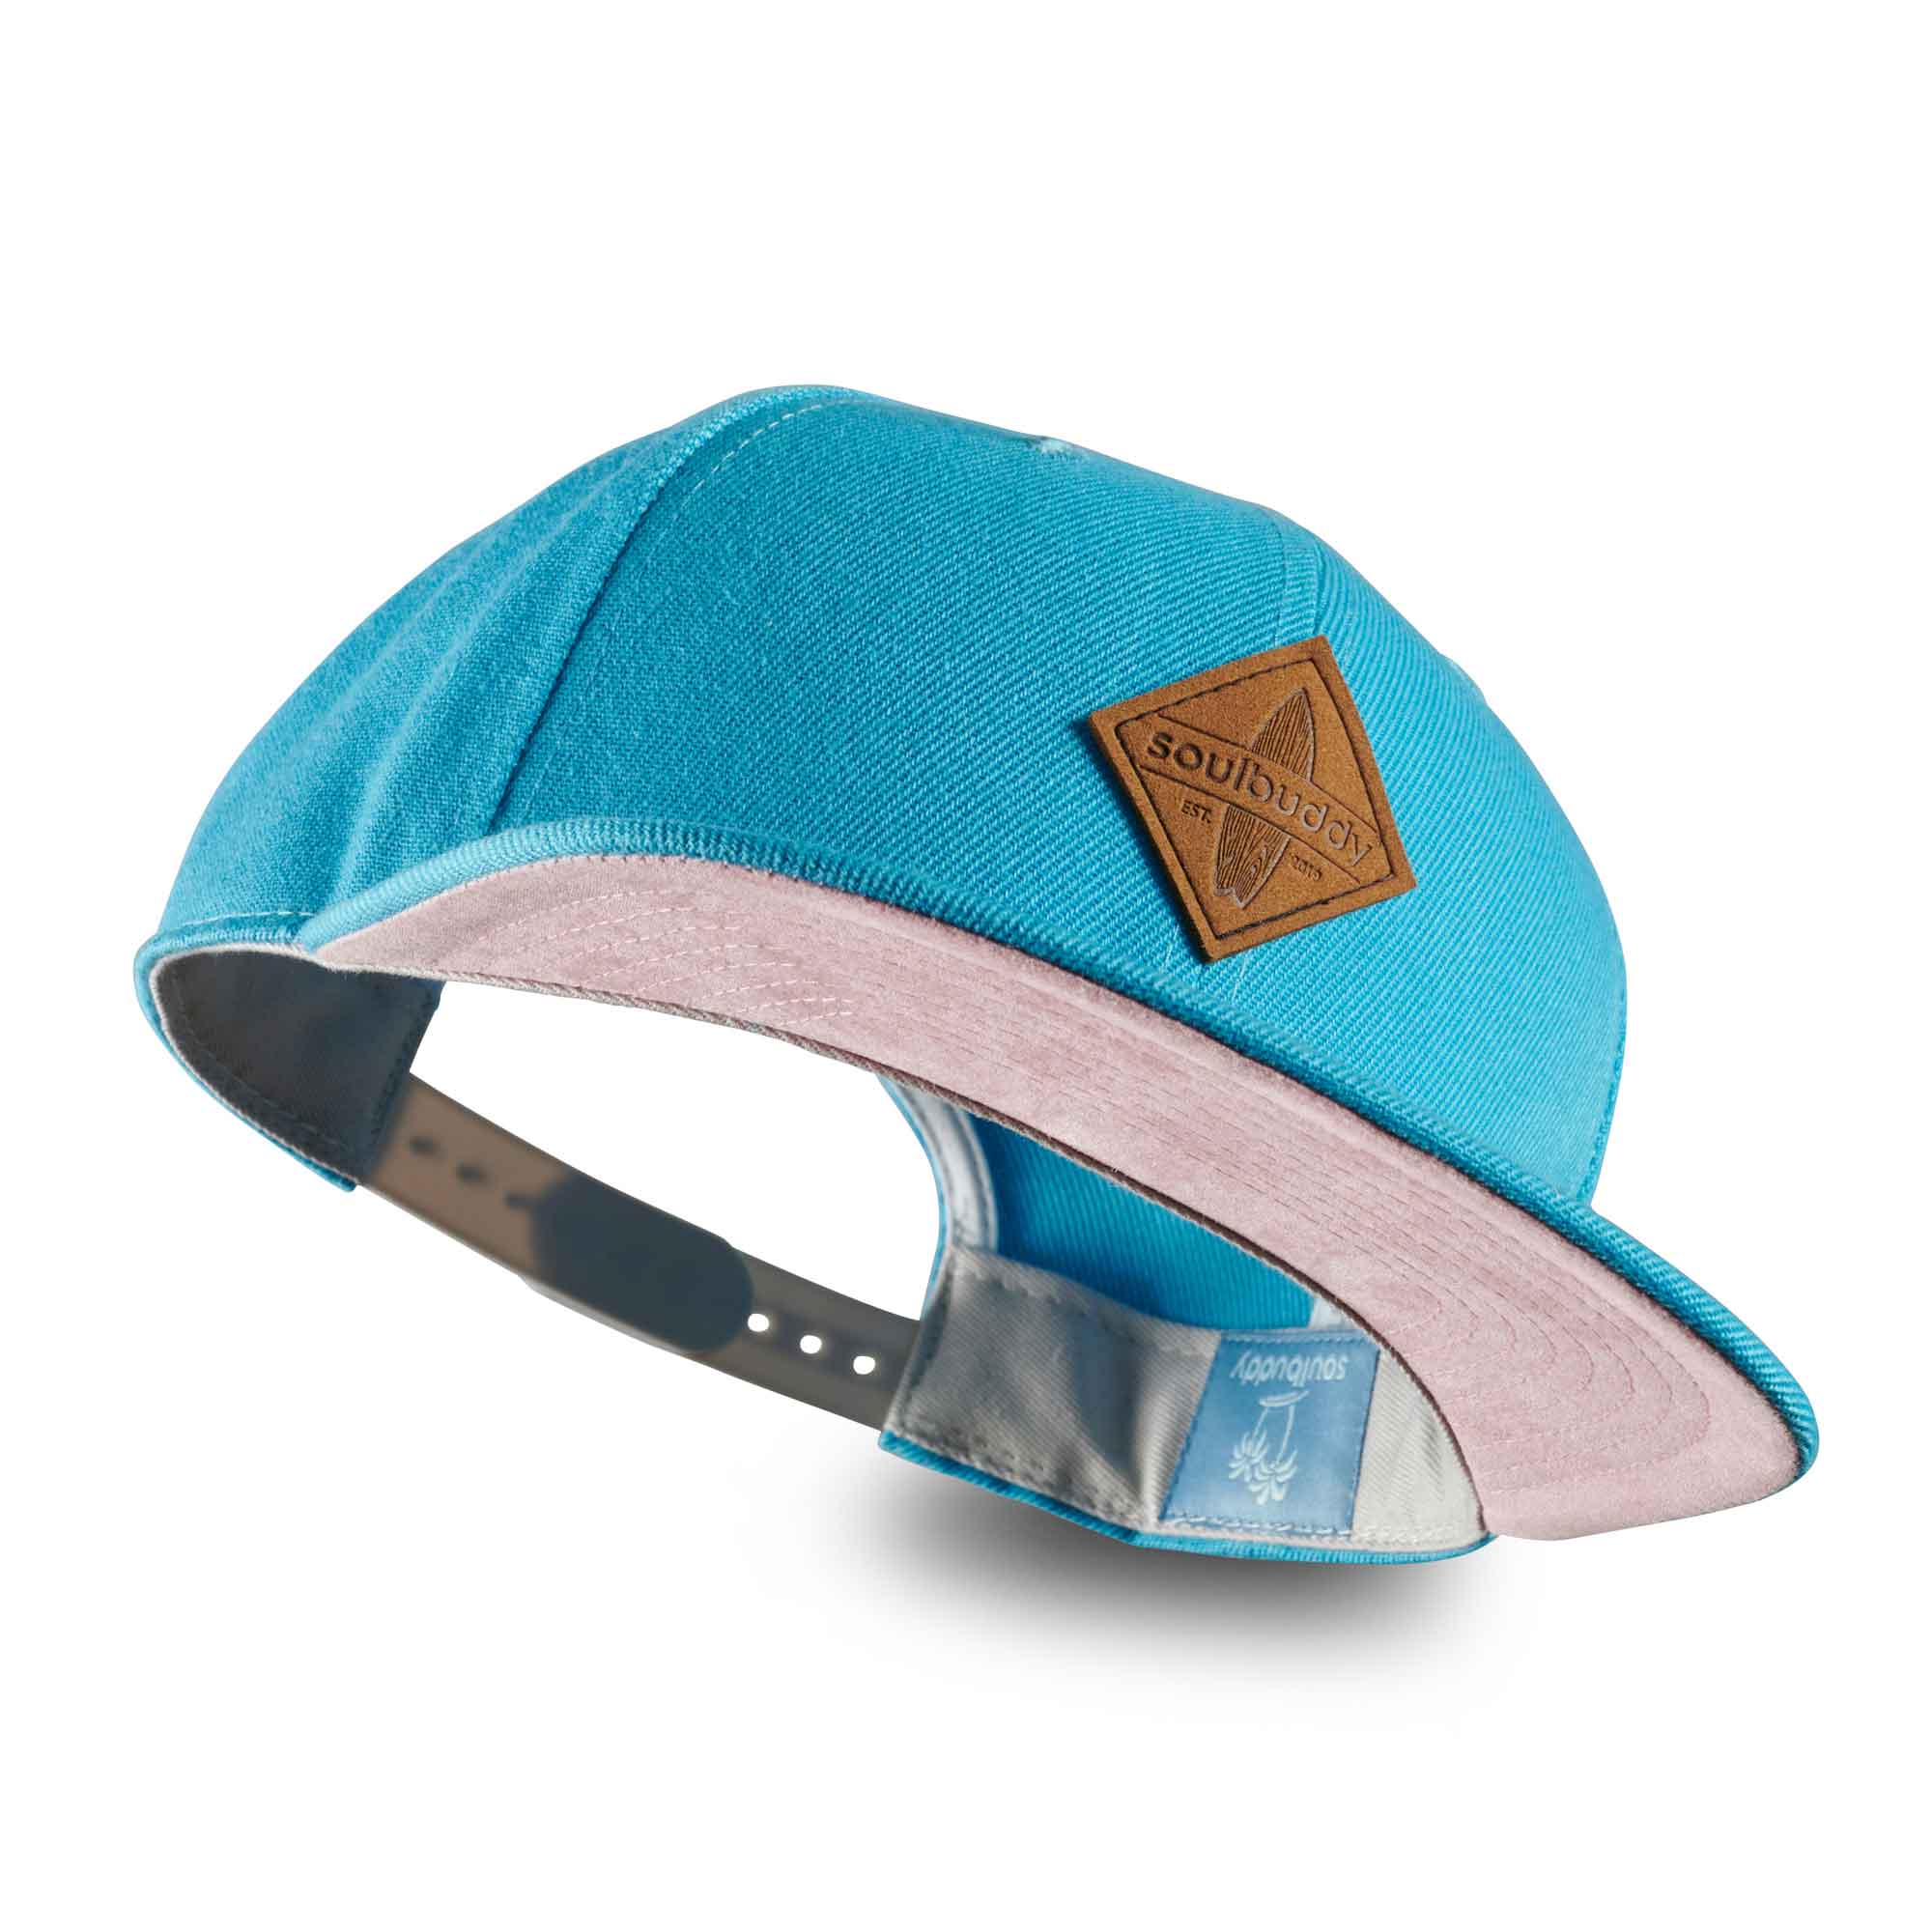 Adult Snapback Cap - Skyblue Pink (One Size)